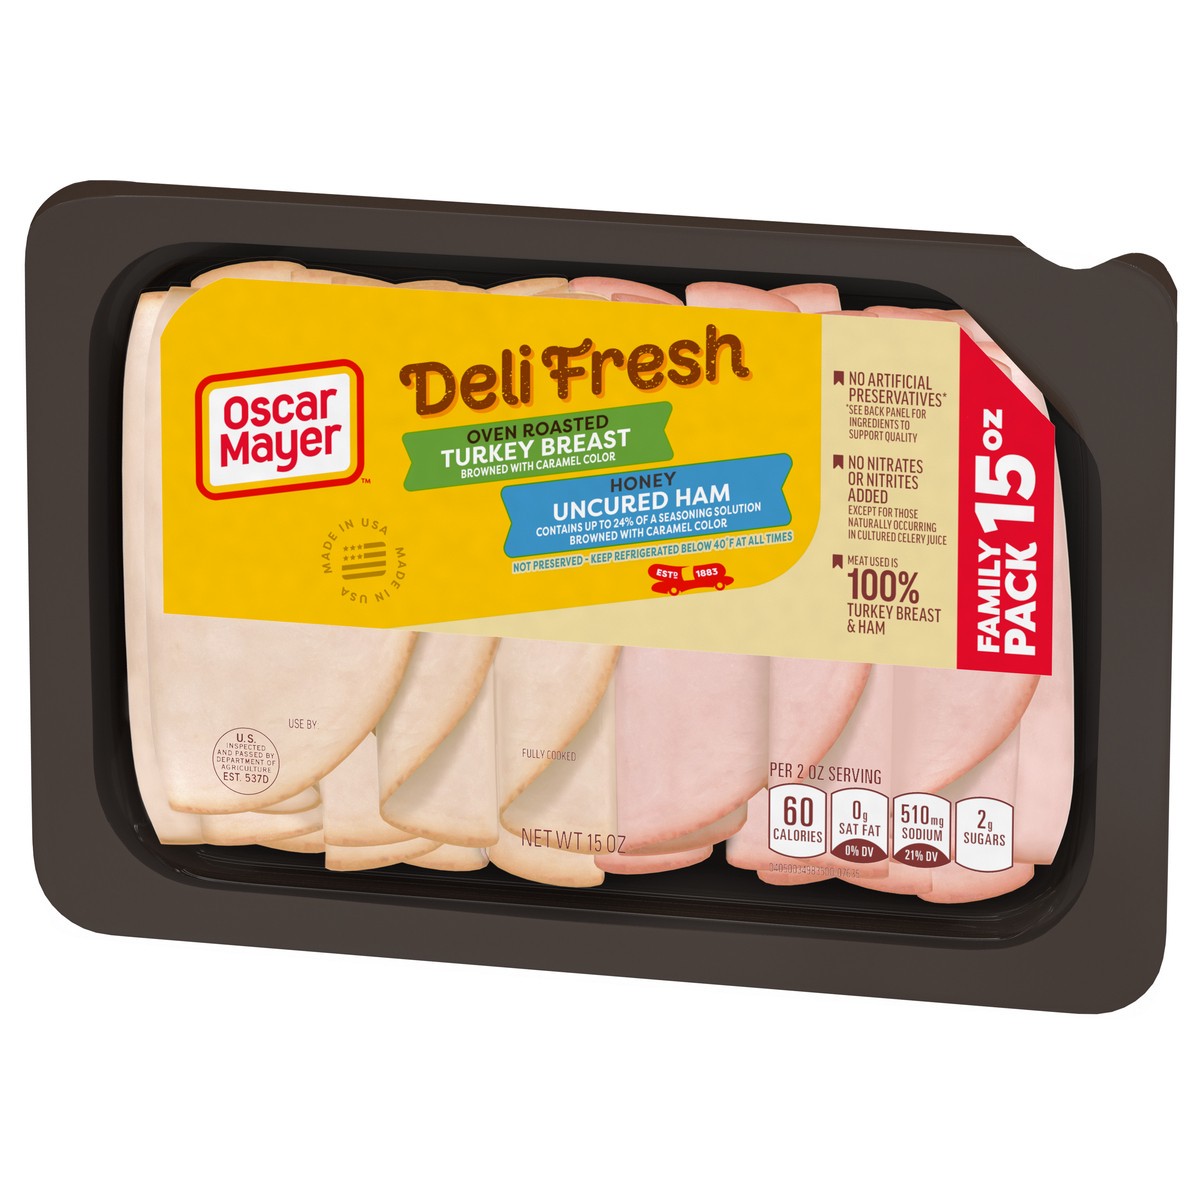 slide 5 of 9, Oscar Mayer Deli Fresh Oven Roasted Turkey Breast & Honey Uncured Ham Sliced Lunch Meat Variety Pack, 15 oz. Family Size Tray, 15 oz